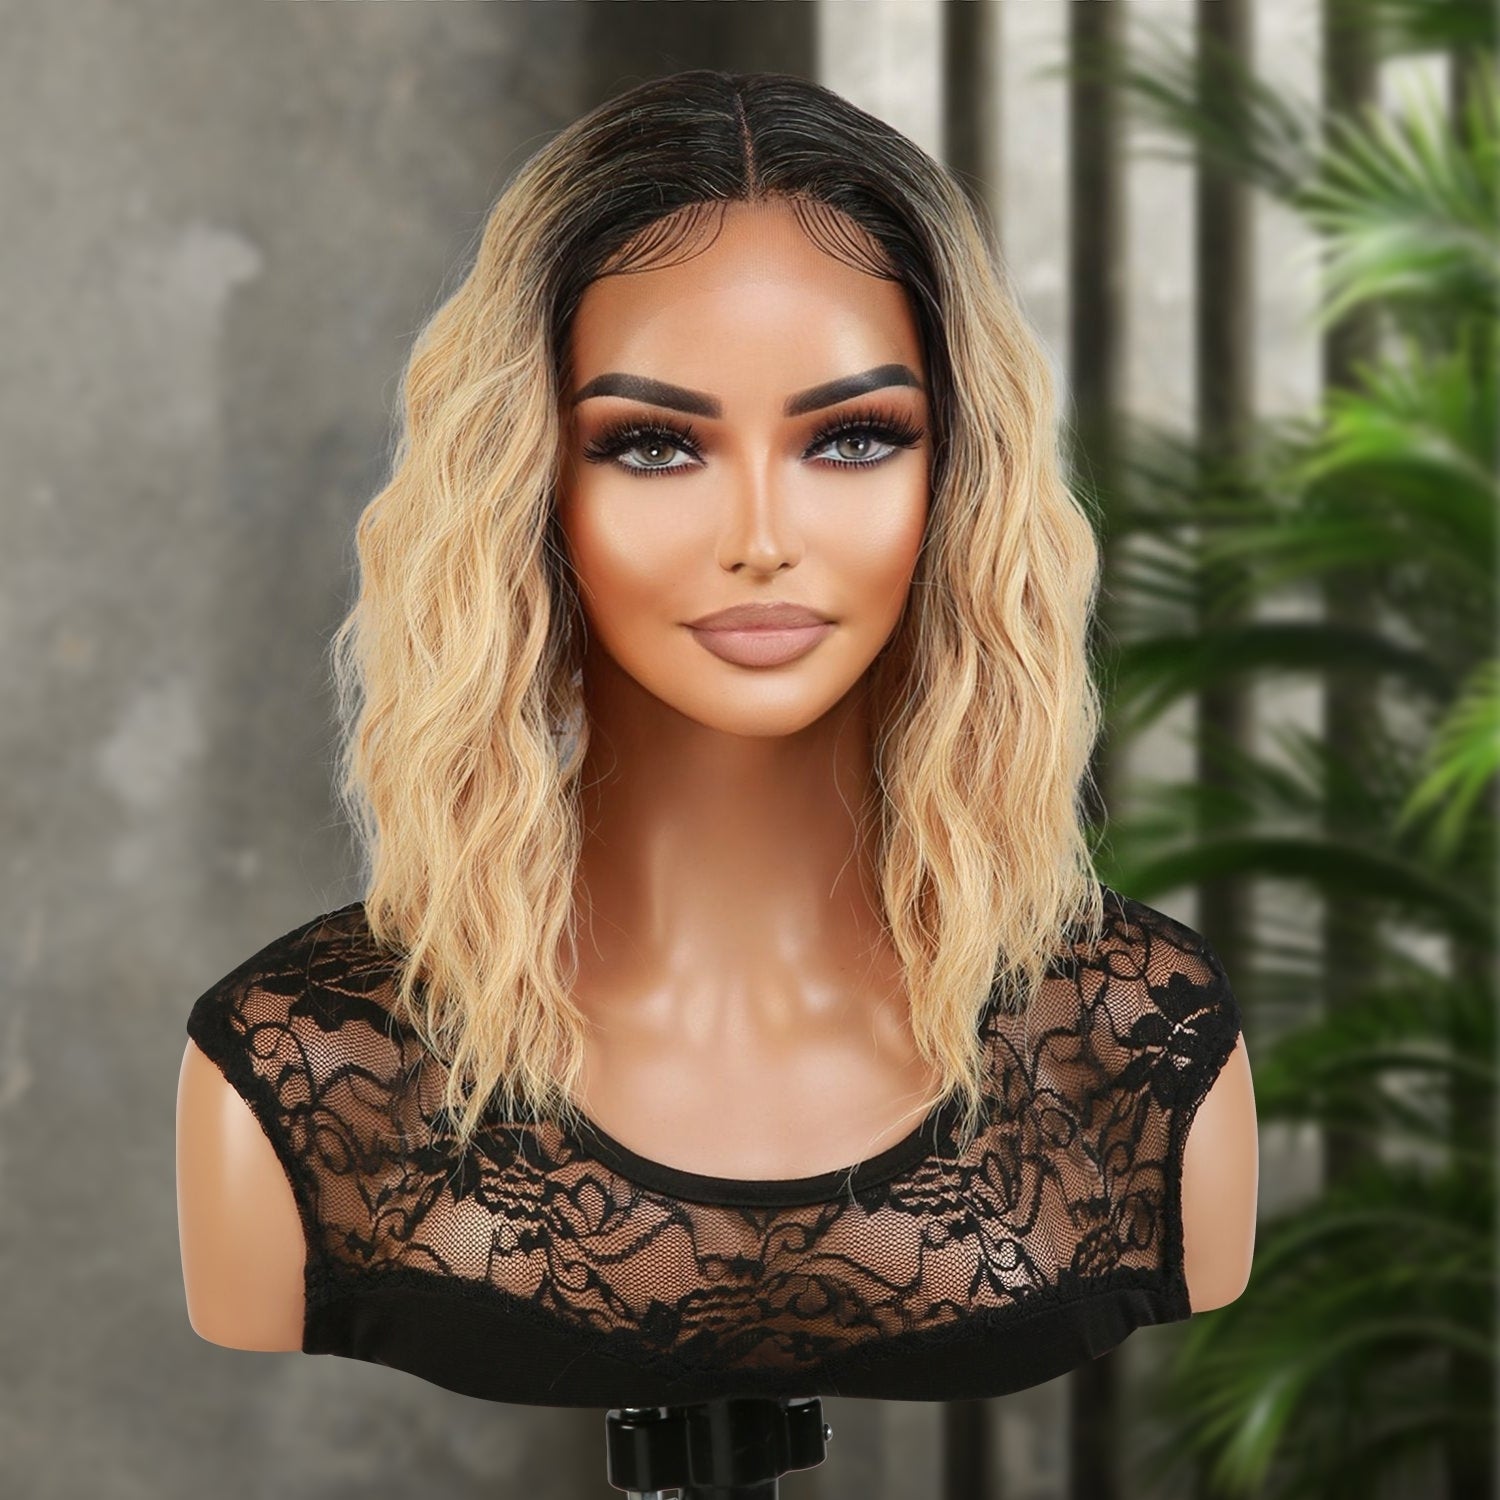 Introducing our gorgeous loose deep wave layered bob wig! Made with heat-resistant synthetic fibers, this wig features a middle part Swiss lace front for a natural-looking hairline. With a 12-inch length and curly wavy style, it adds volume and dimension to your hair. The layered bob cut adds a trendy touch. Perfect for black women, this easy-to-wear and style wig is a must-have. Shop now for ultimate style and versatility!